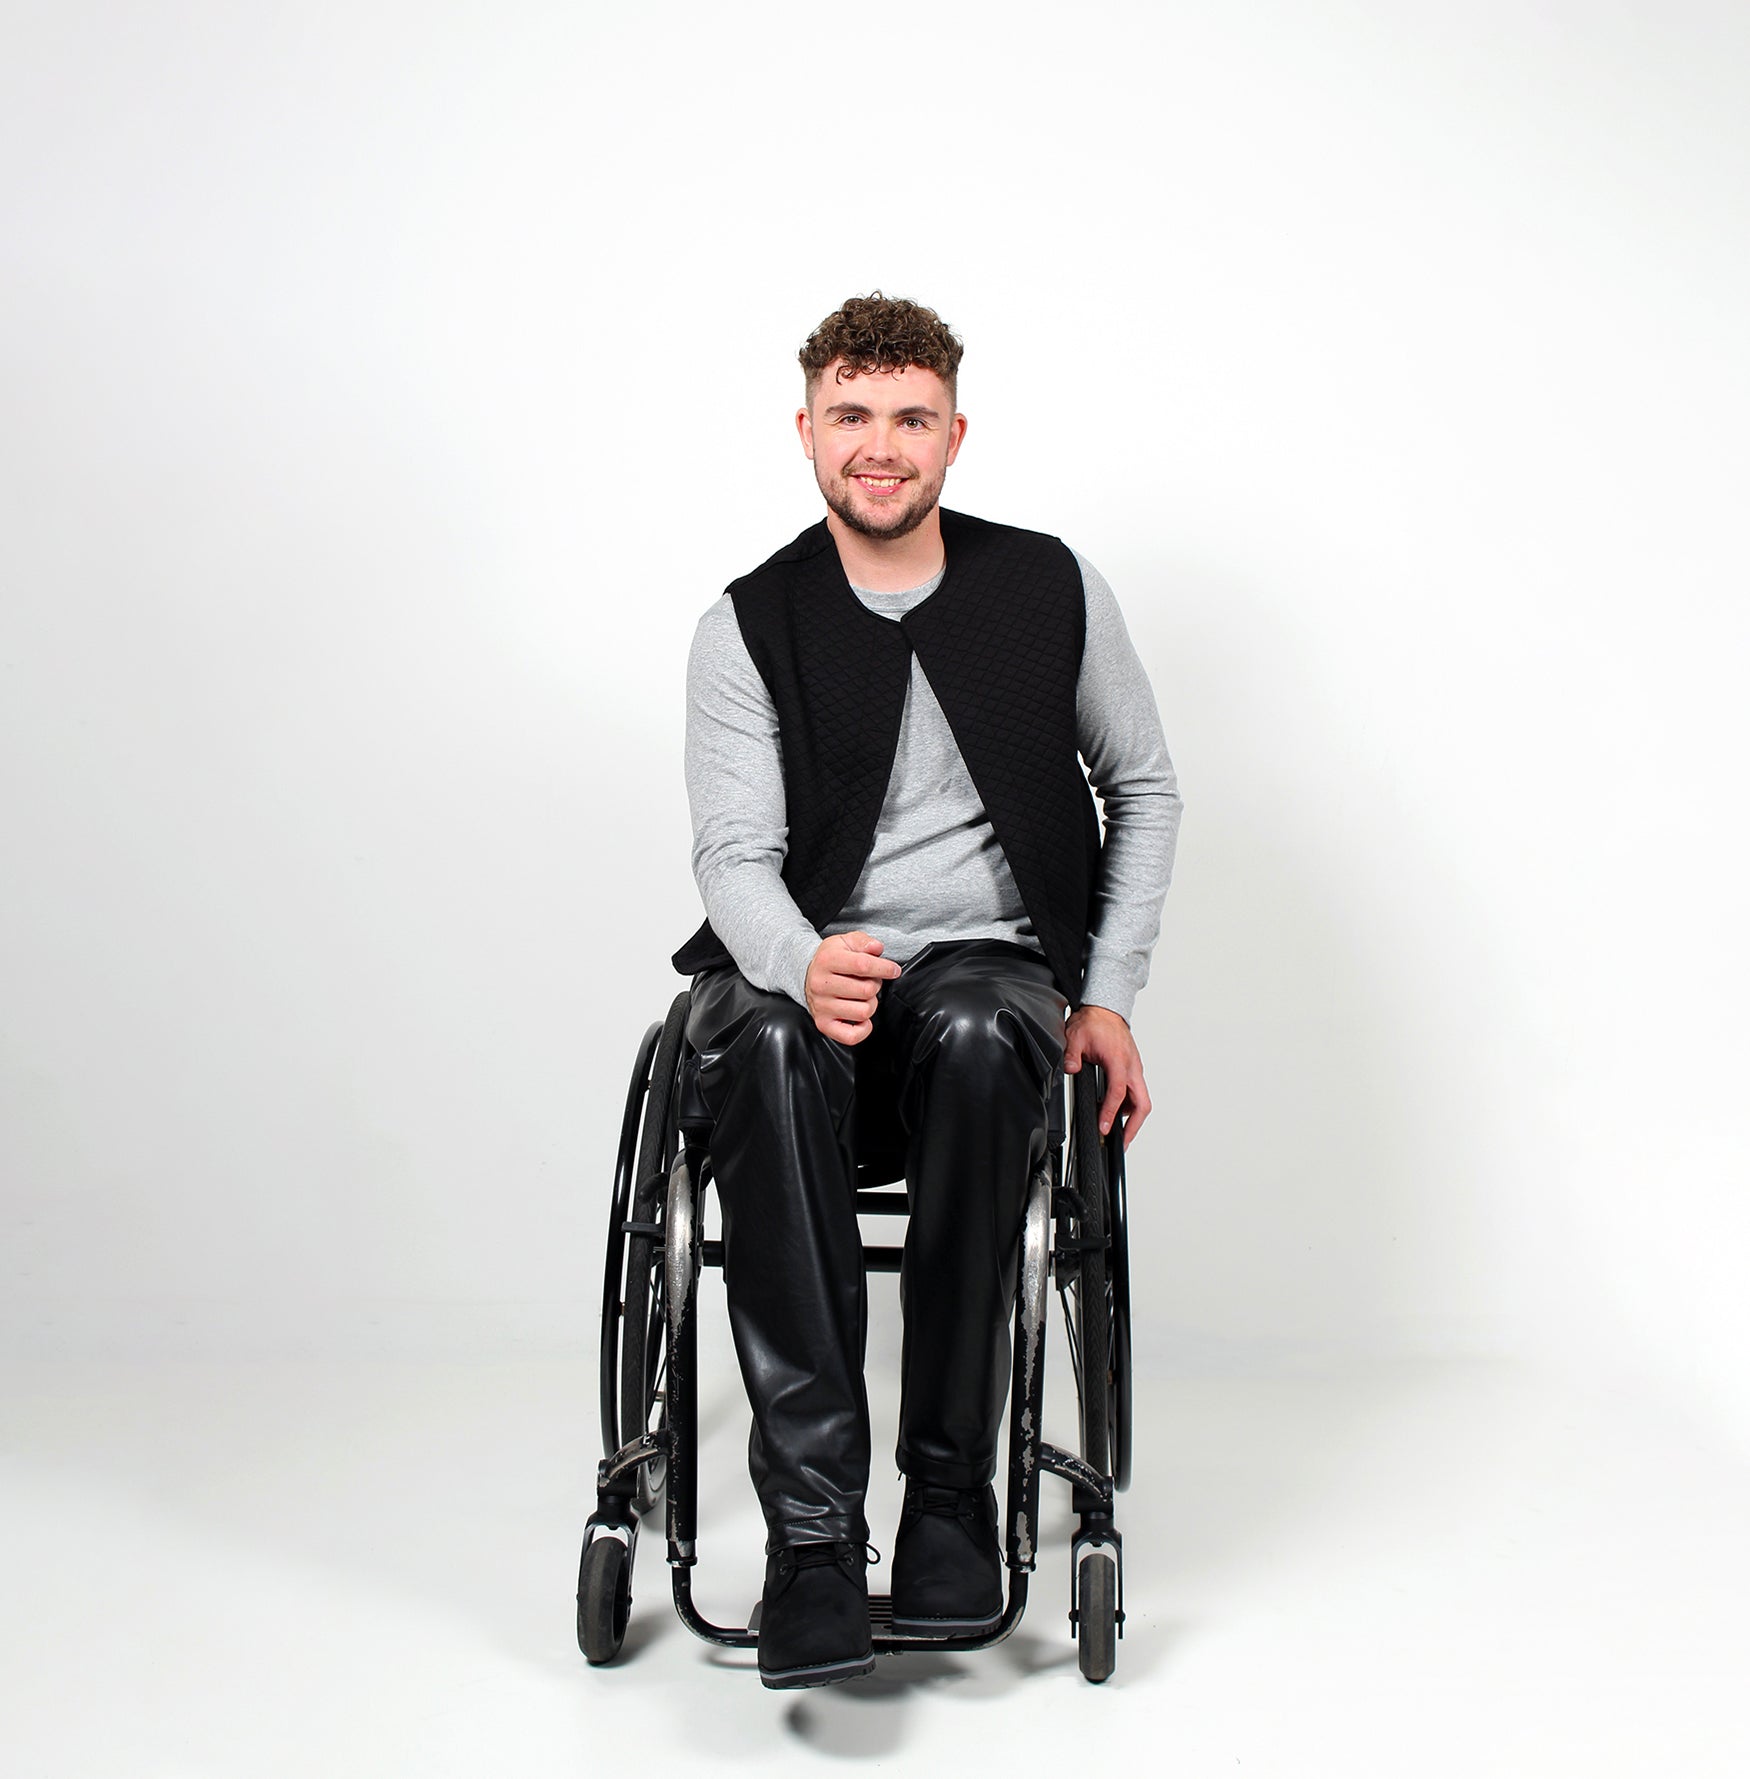 EasyUndies - Adaptive Clothing for Independent Living